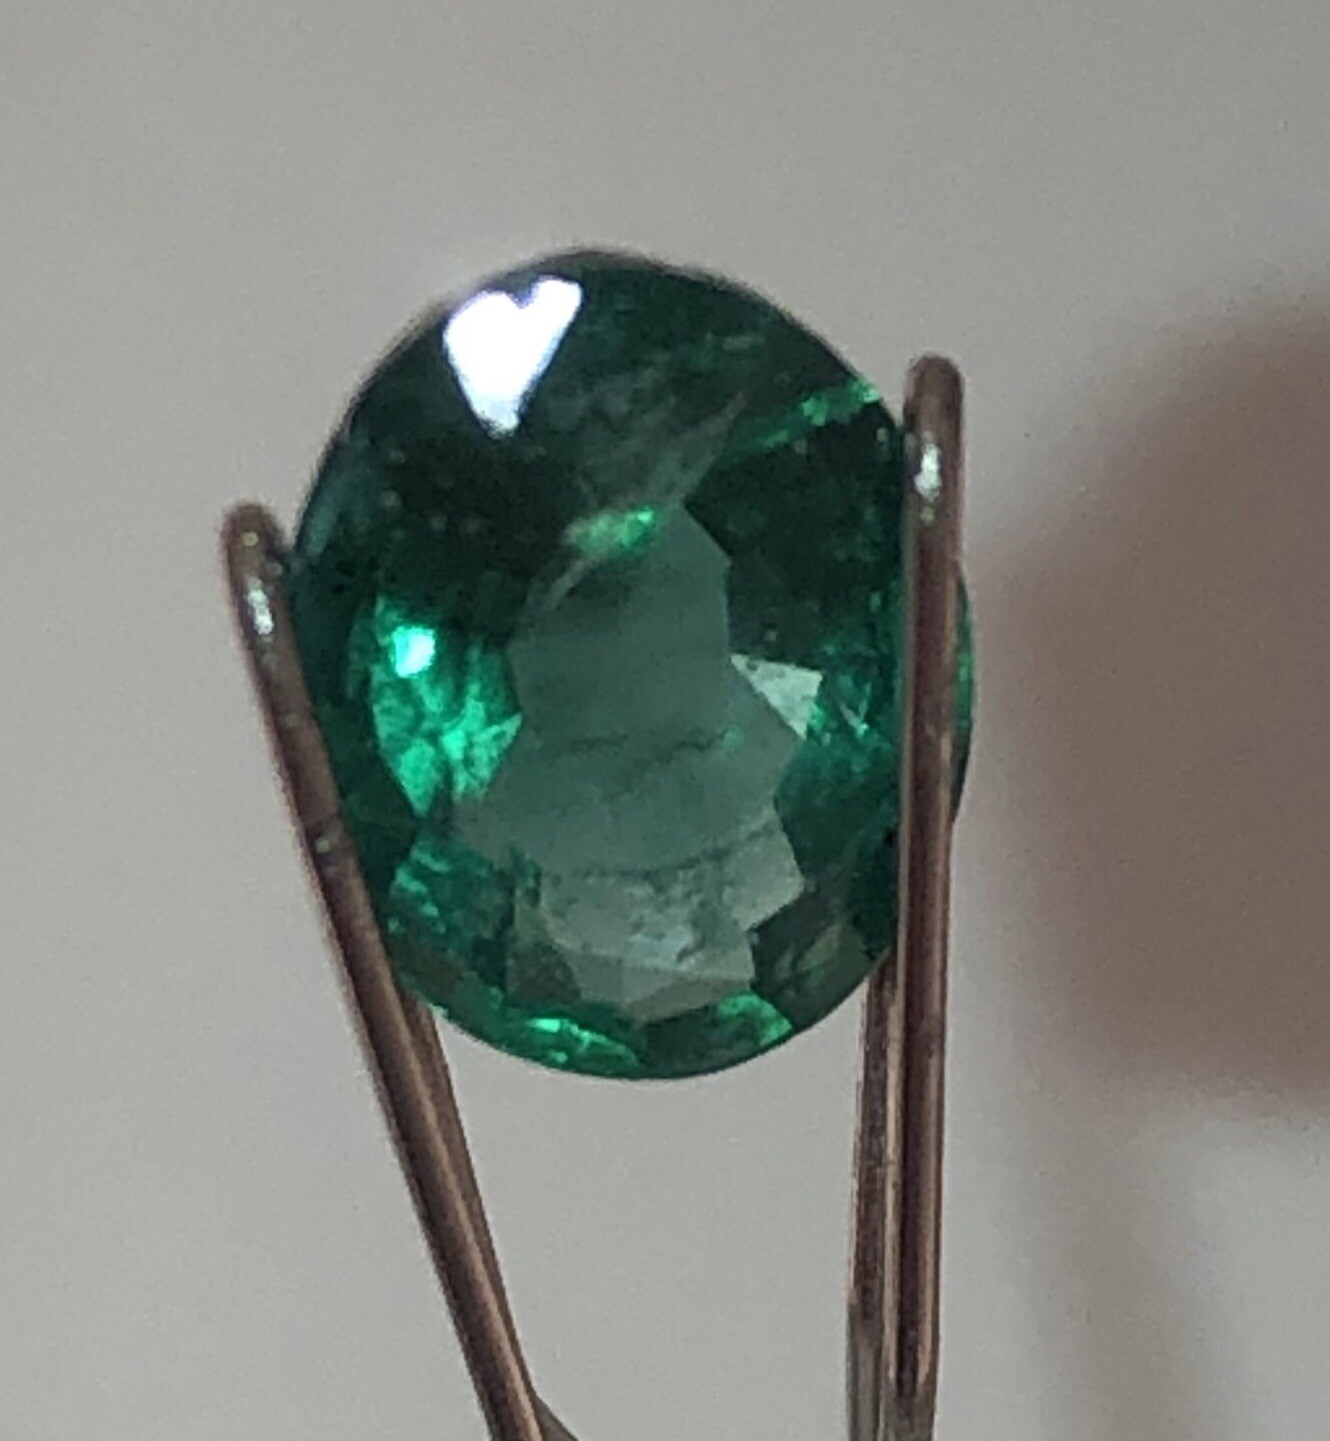 Emerald Certified By EGL-USA, 1.24 ct With Excellent Color And Clarity.